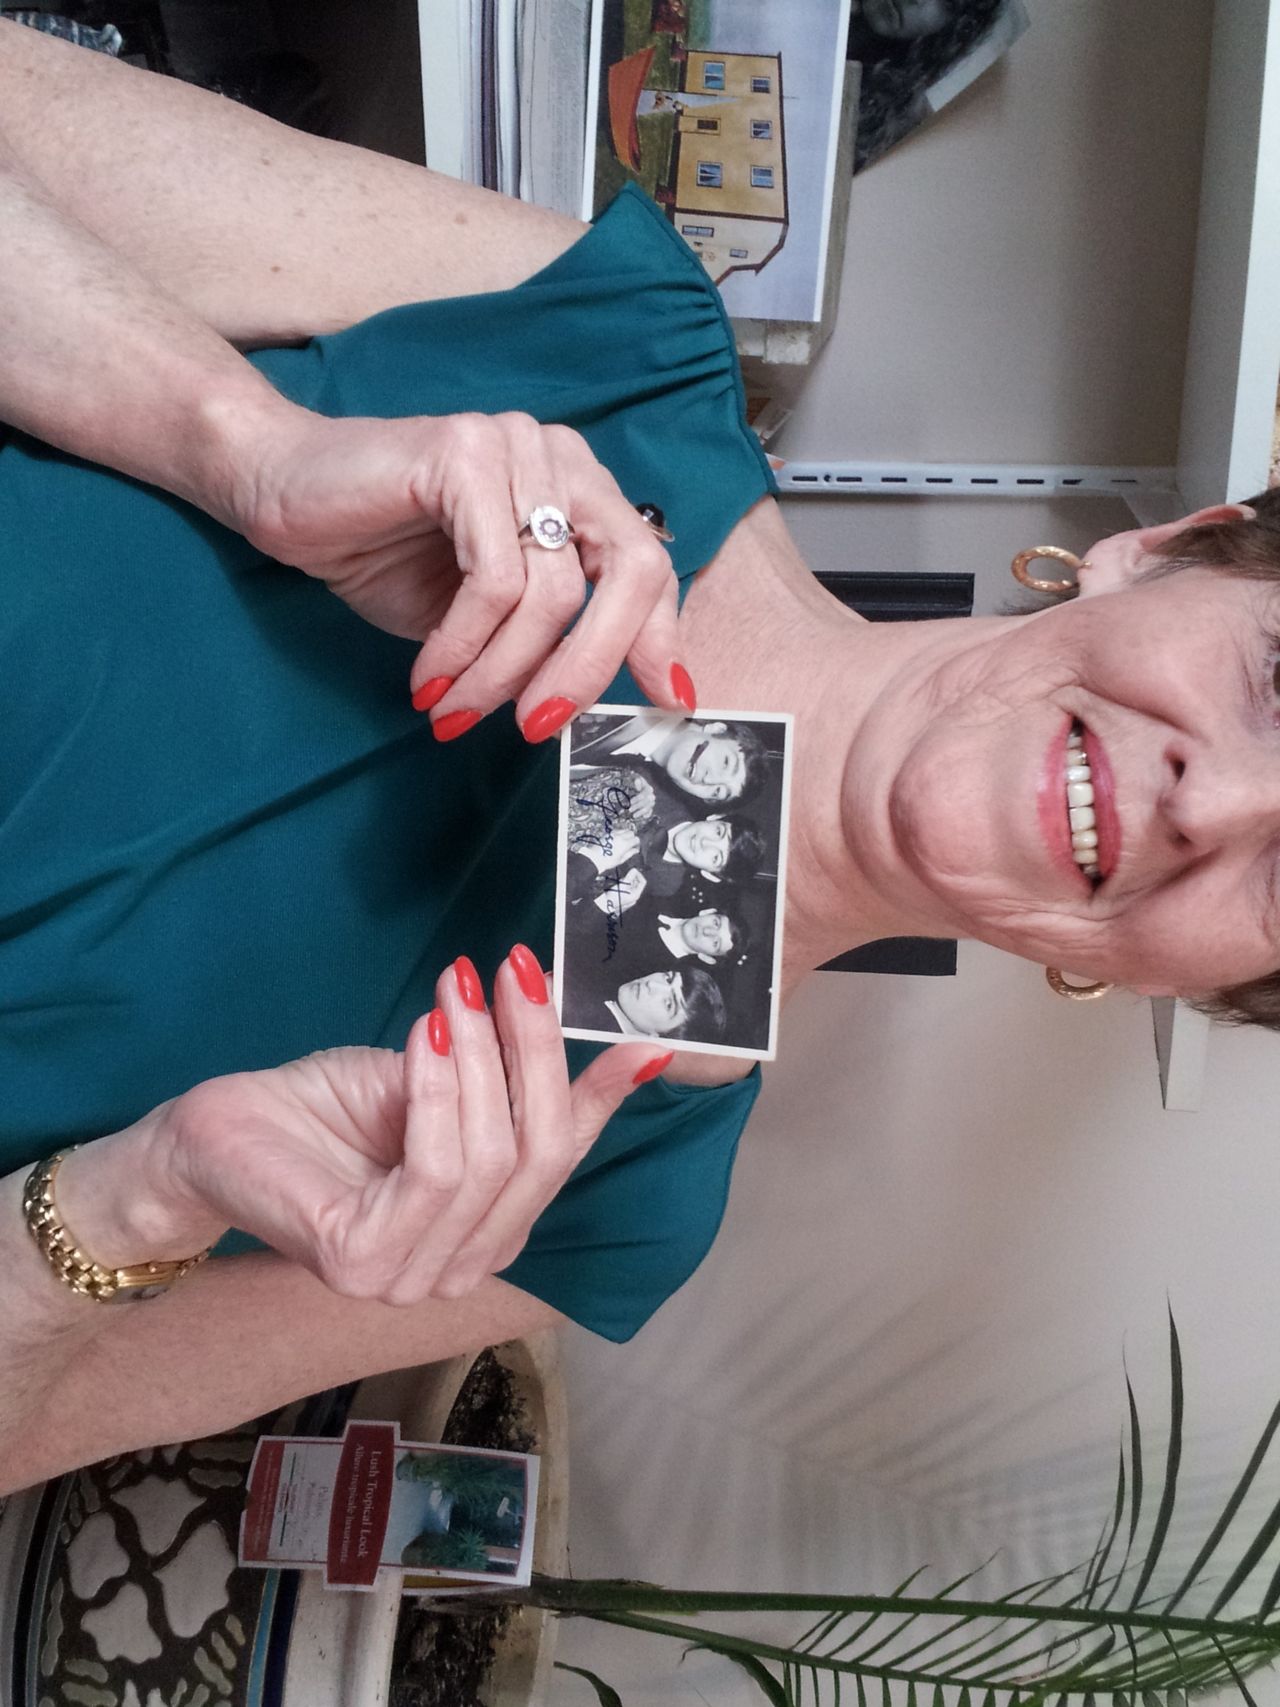 <a href="http://ireport.cnn.com/docs/DOC-1078564">Rita Stamp</a> was one of many young people around the world who were caught up in "Beatlemania" when the famous band first visited the United States in February 1964. Stamp, now 67, will never forget finding this photo of the Beatles (complete with facsimile autograph by George Harrison) in a pack of bubble gum. "This photo is my earliest memory of the Beatles because, at least, I was able to see what they looked like and that gave me the ability to connect with their music."